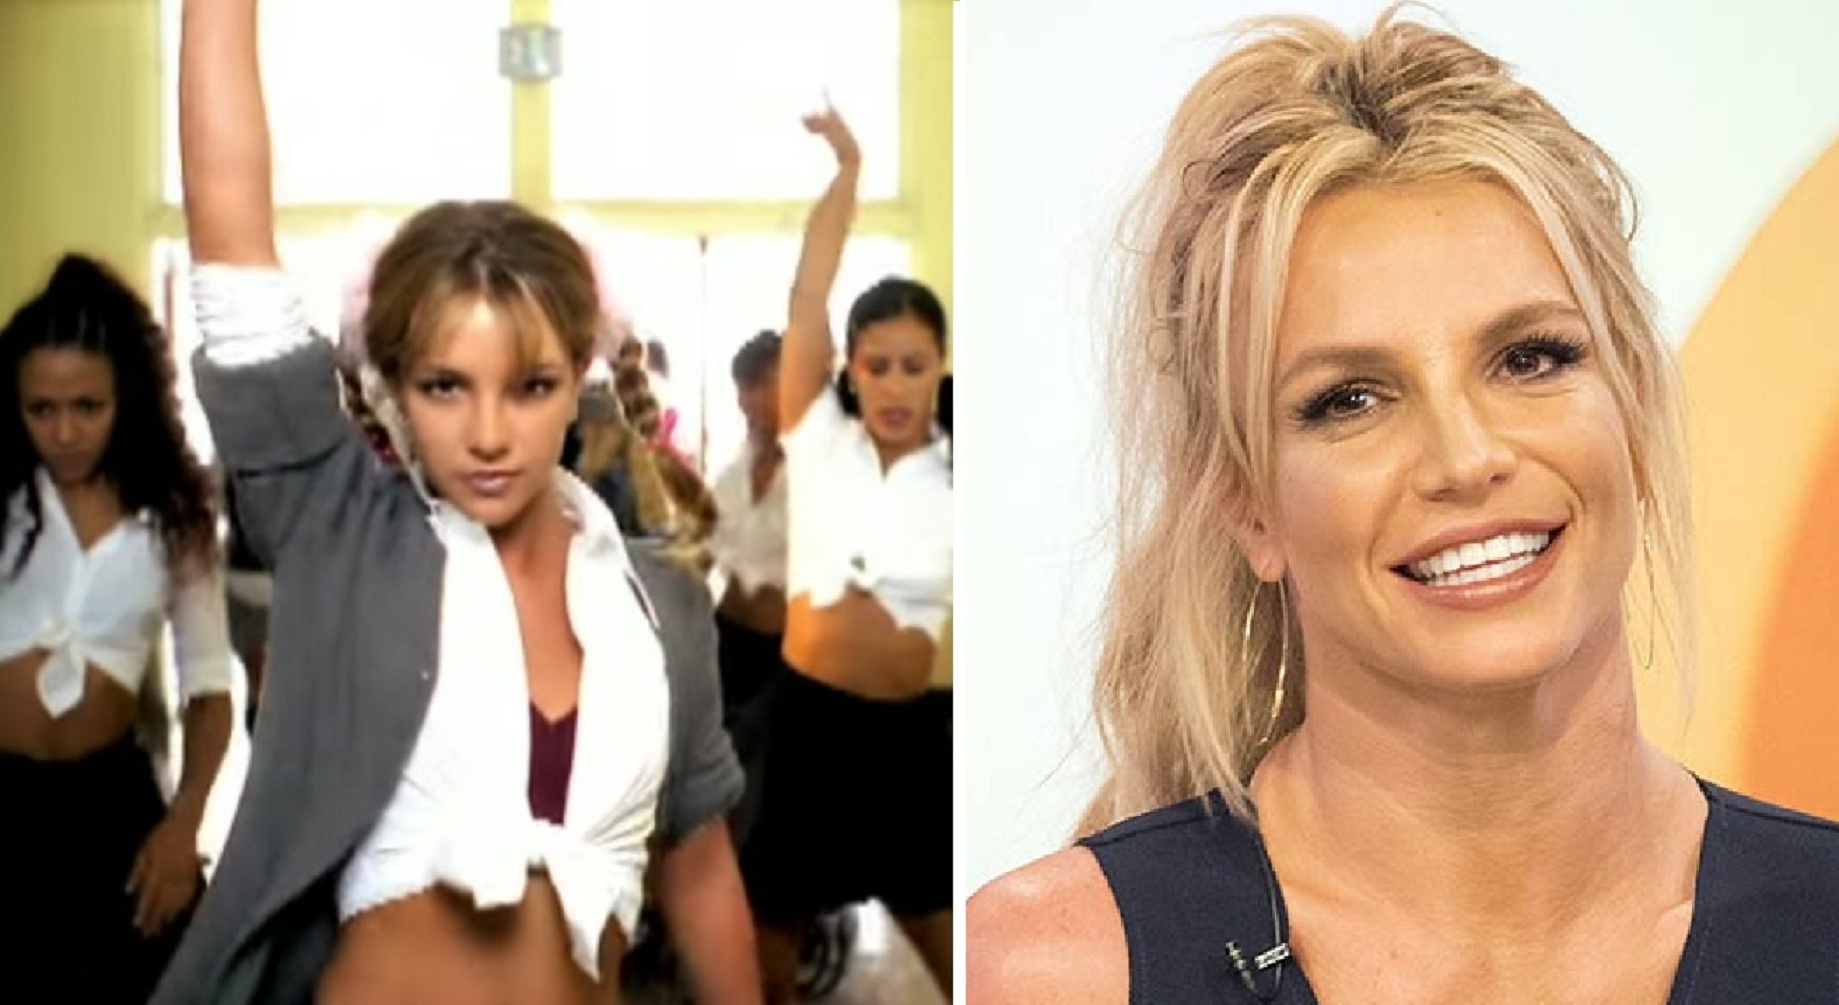 20 Years of ‘Baby One More Time’, Britney Remembers ‘Starting Out’ With Her First Record…